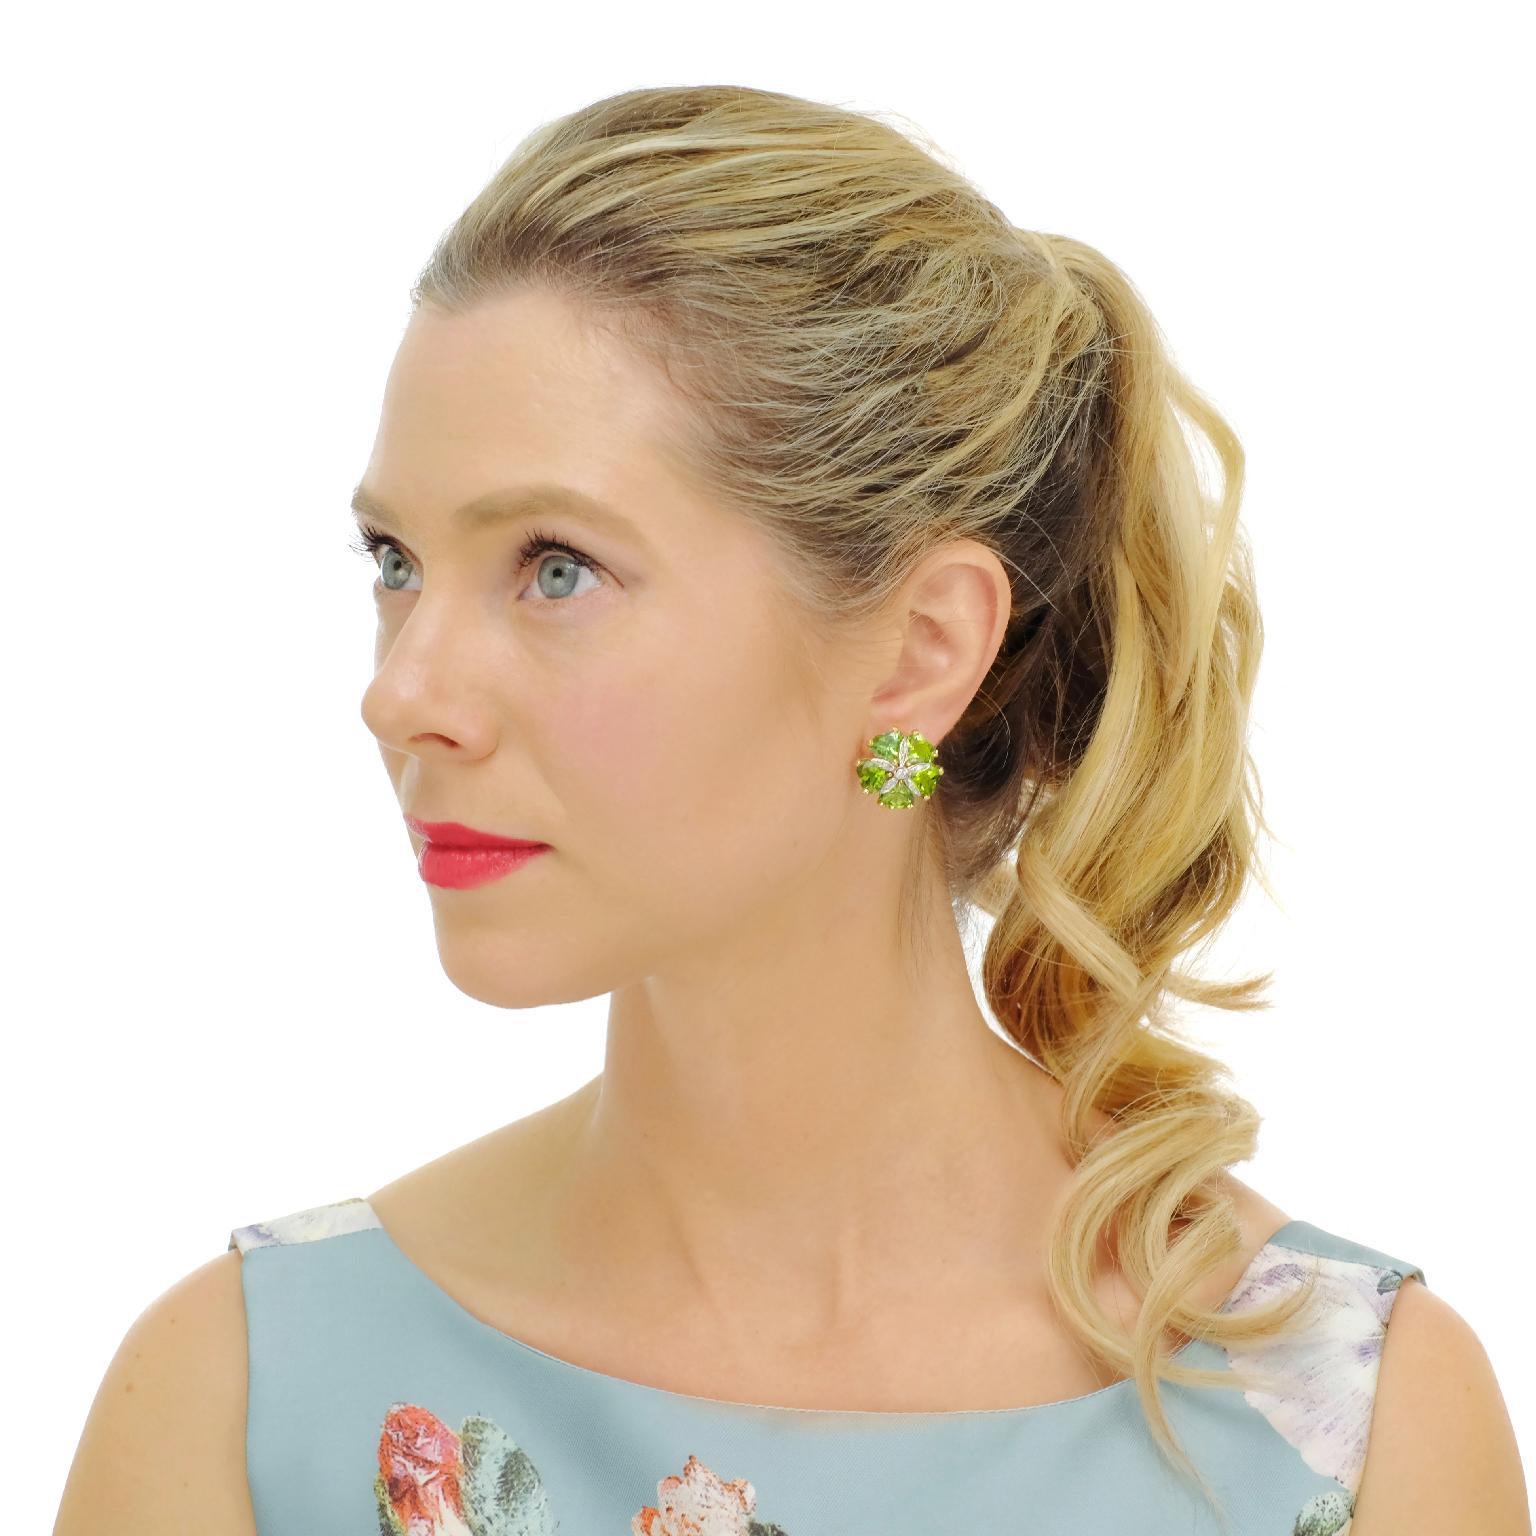 Circa 1980s, 18k.   These sophisticated eighties earrings have a fresh visual appeal. The colorful floret motif, in vibrant peridot with diamond-set centers, is elegantly colorful. The look effortlessly dresses up or down. Finely fabricated, the 10